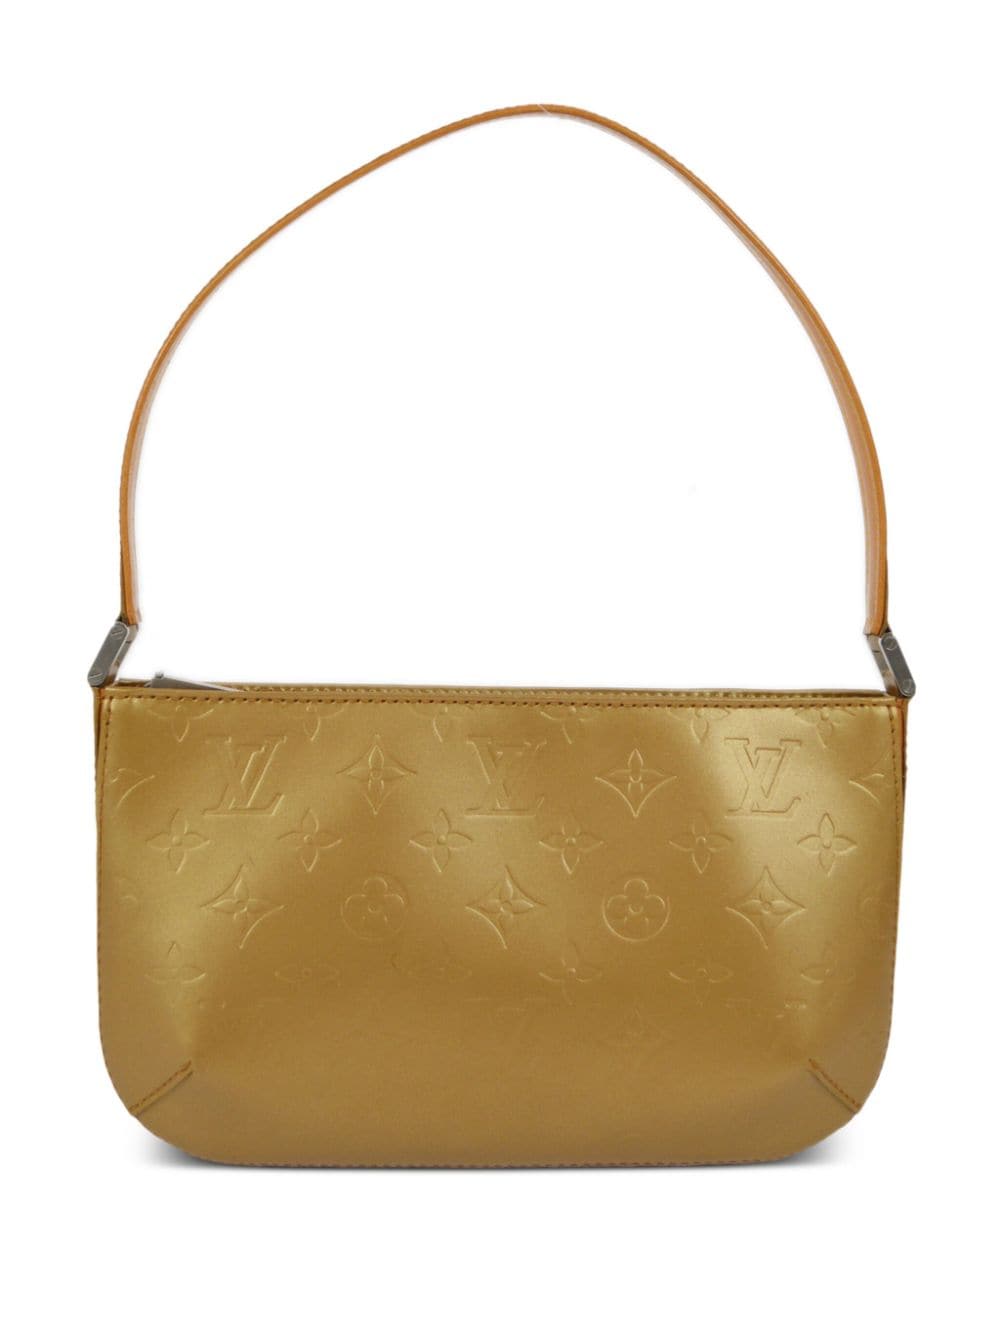 Louis Vuitton Pre-Owned 2003 pre-owned Fouler handbag - Gold von Louis Vuitton Pre-Owned